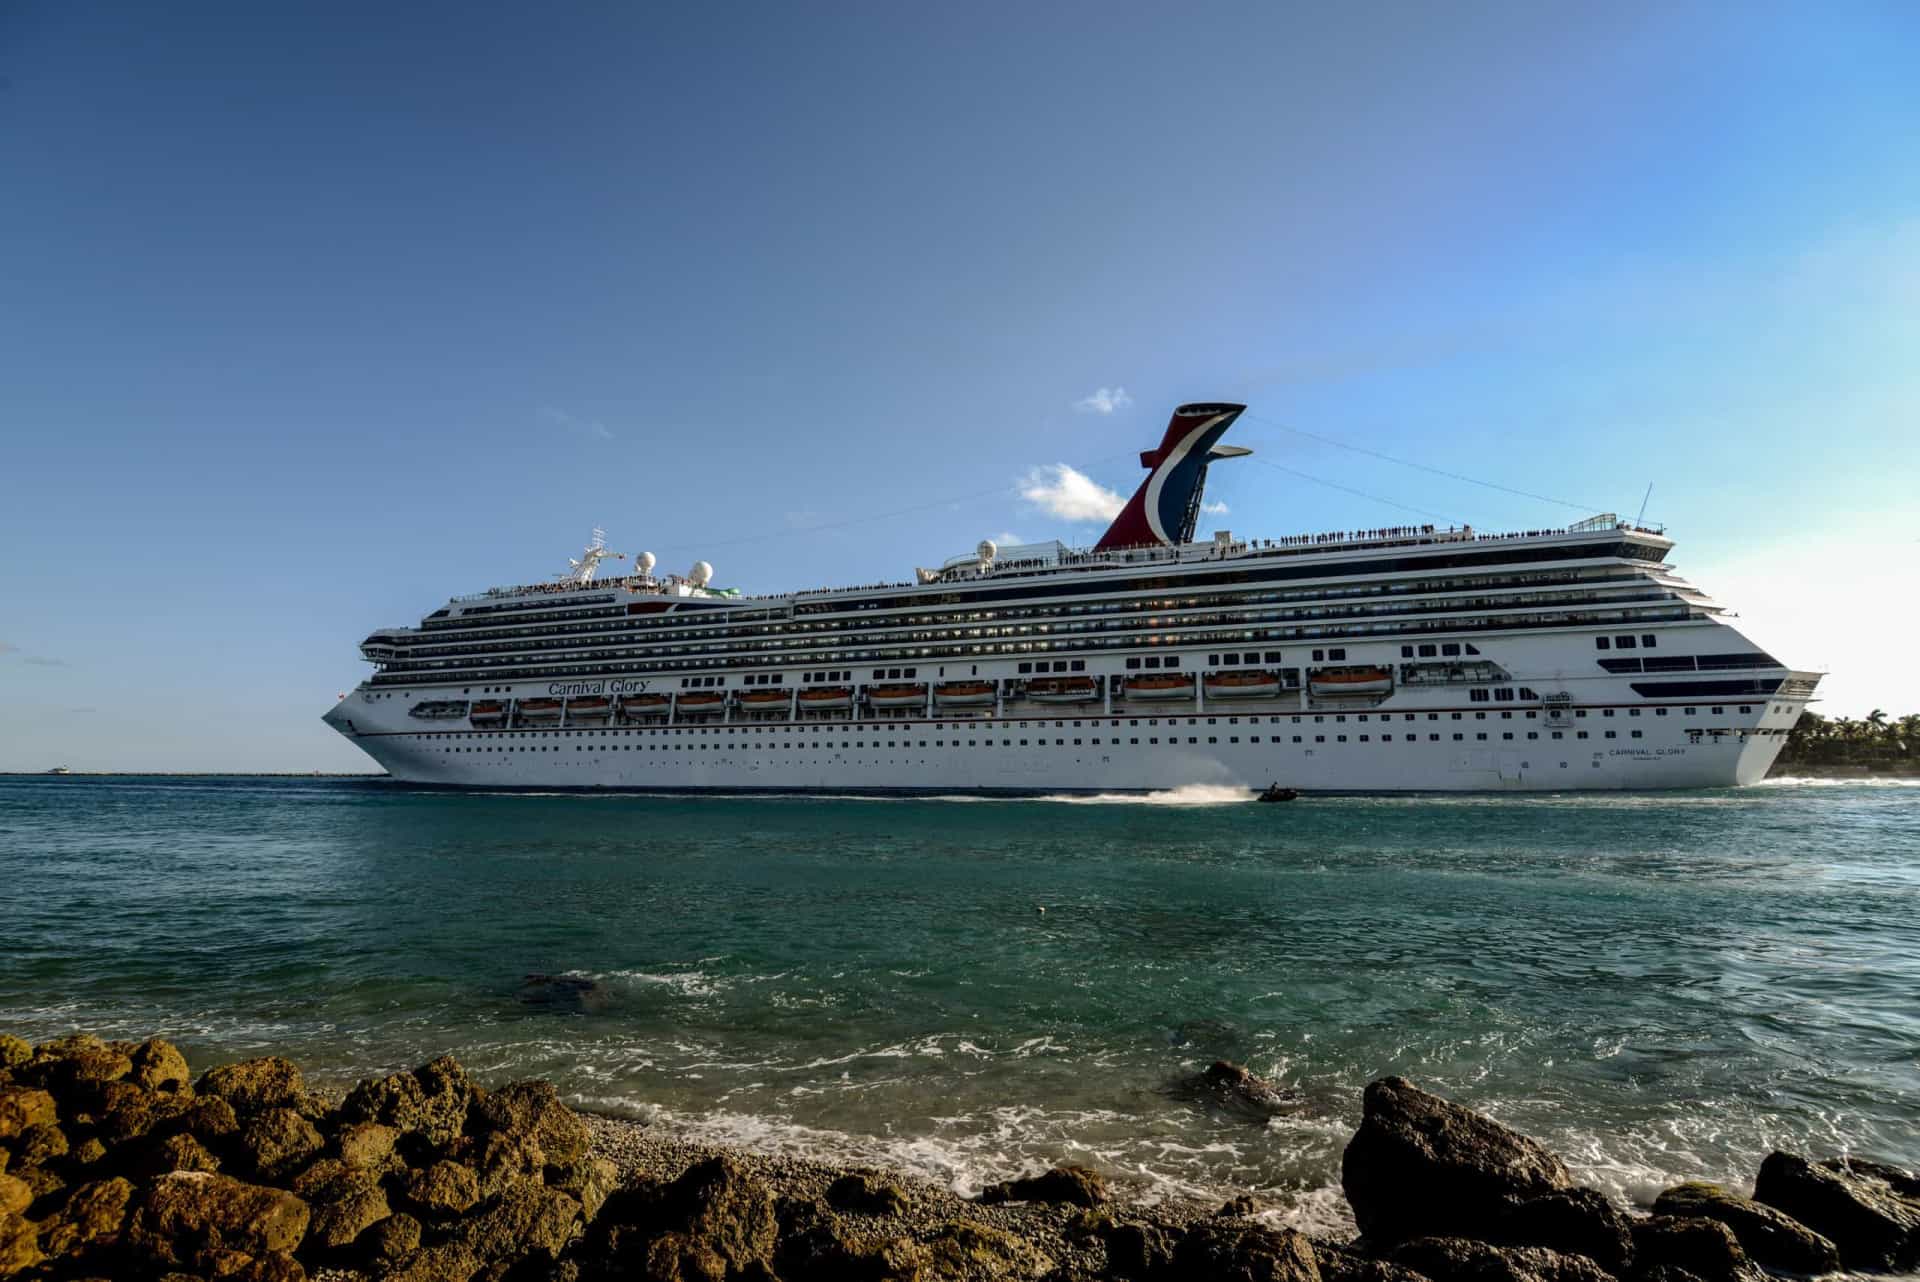 <p>Shocking cell phone footage from the Carnival Valor cruise ship captured the final frantic moments of a 32-year-old woman's life. She was on a five-day cruise from New Orleans to Mexico with her husband when the incident occurred. Reports say the video was captured just after some kind of incident in the hot tub. It shows the woman being restrained by three security guards by the pool area of the ship. She is struggling to break free and is heard shouting the name "Alicia." The guards hold her arms behind her back and handcuff her before leading her up the stairs and away from the pool. According to witnesses, she broke free from the guards a few minutes later and proceeded to jump off the tenth floor of the ship into the ocean. Rescue attempts began immediately but it's believed that the woman hit her head on the way down and immediately disappeared beneath the water's surface. The coast guard searched 2,514 square miles (6,511 square kilometers) for 14 hours before suspending their search </p><p>Cruise ships regularly lose passengers, even crew members, and continue on their trip unless ordered to stop by the local coast guard. But often the coast guard won't be notified until hours after the person has been reported missing. Think about it this way: cruise ships are full of thousands of people, many of whom are <a href="https://www.starsinsider.com/celebrity/407679/stars-acting-under-the-influence-on-set" rel="noopener">intoxicated</a>, and no police are anywhere to be found. While security exists, they answer to the cruise ship company, which is focused on maximizing profits.</p><p>Have a look at some of the stories behind how people went missing on cruise ships and were never to be found again.</p>